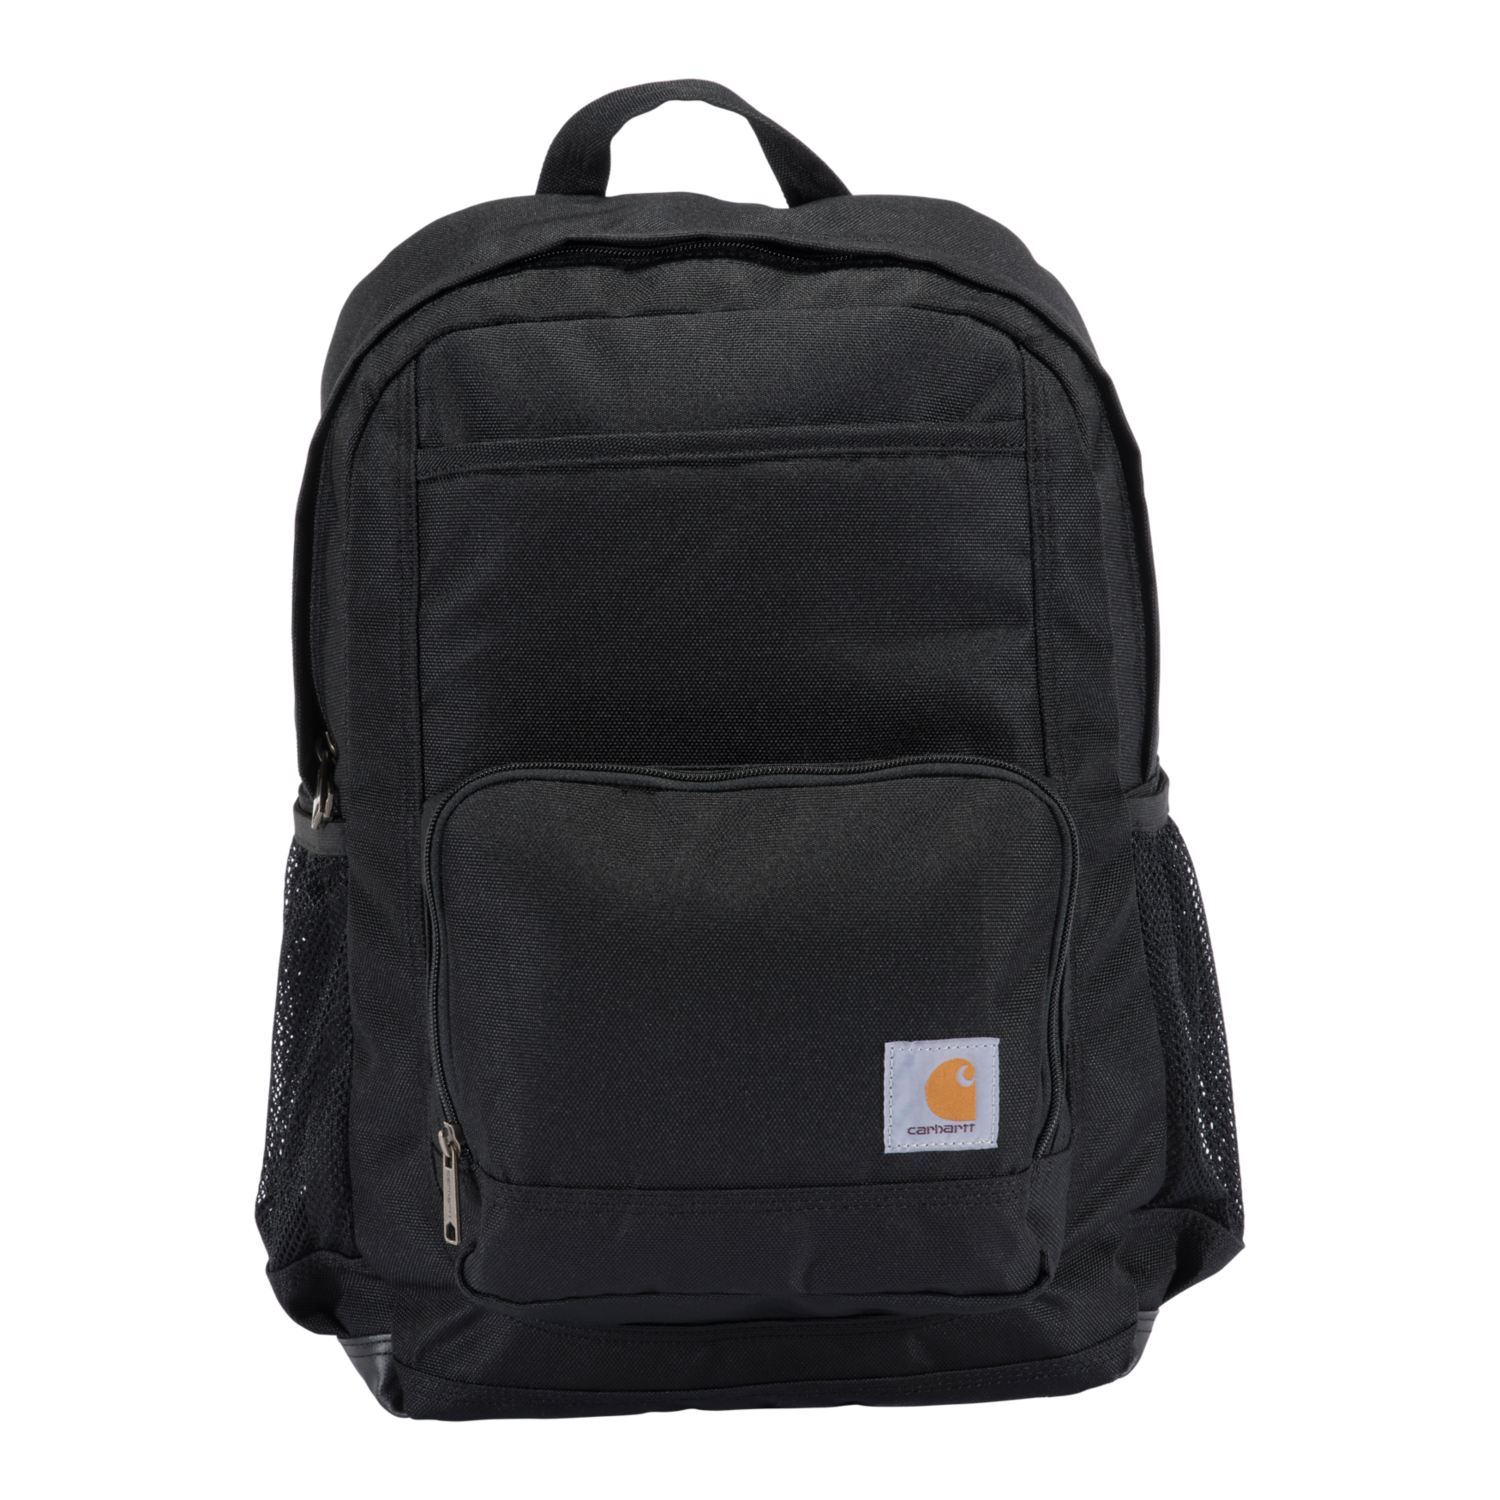 23L_SINGLE-COMPARTMENT_BACKPACK_1OQVFcA3At